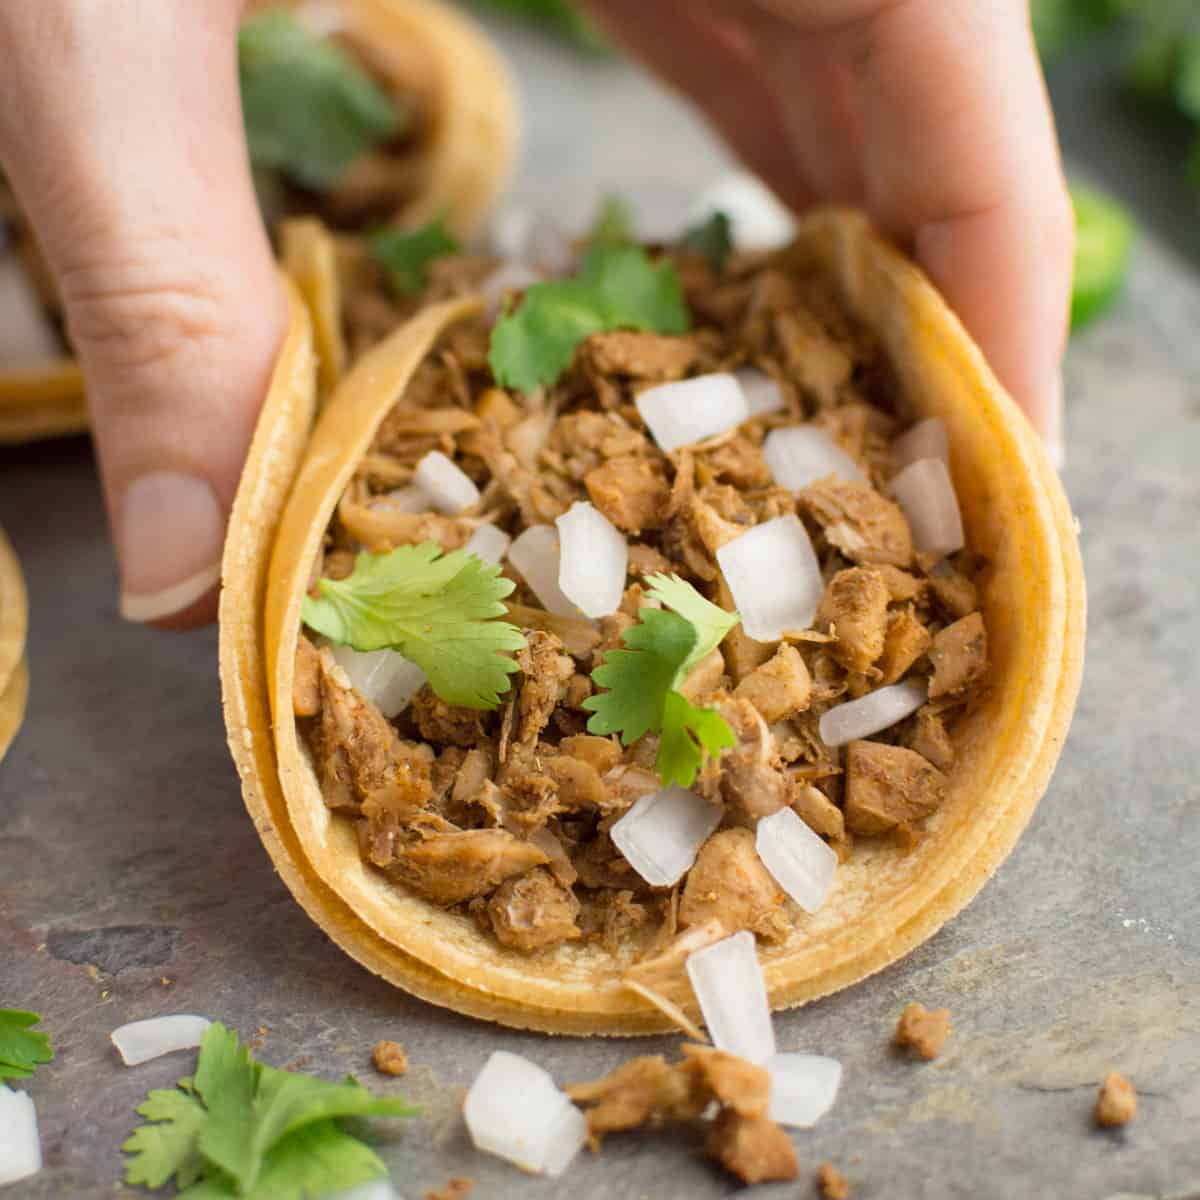 A hand folding up a vegan taco filled with jackfruit meat, onion, and cilantro.